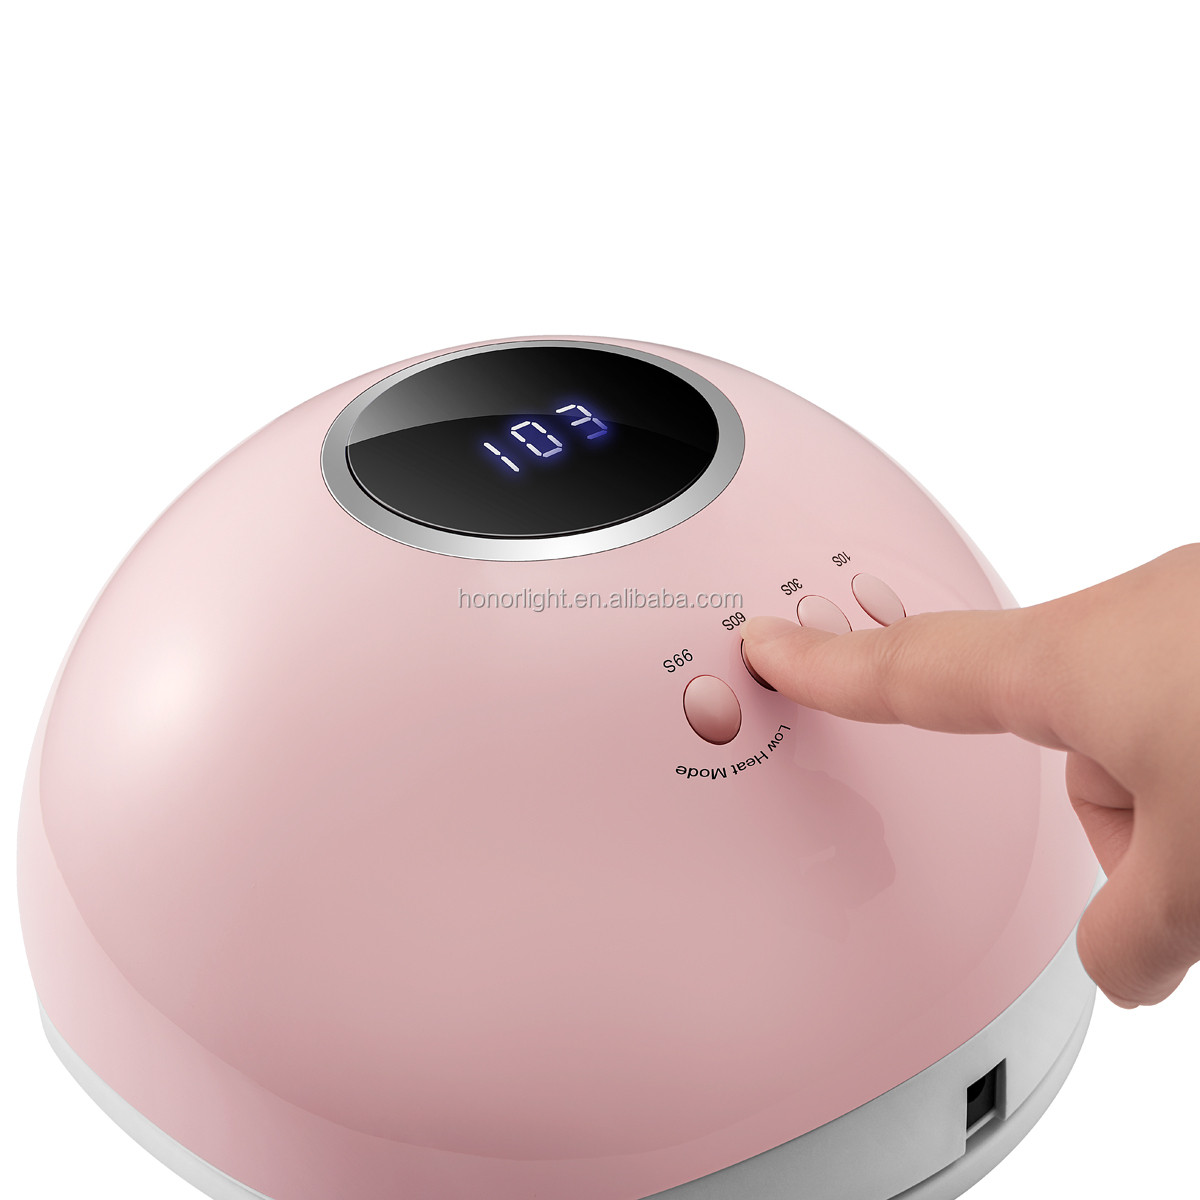 China suppliers nail art salon gel polish dryer manicure machine 48w uv led nail curing lamp for nails